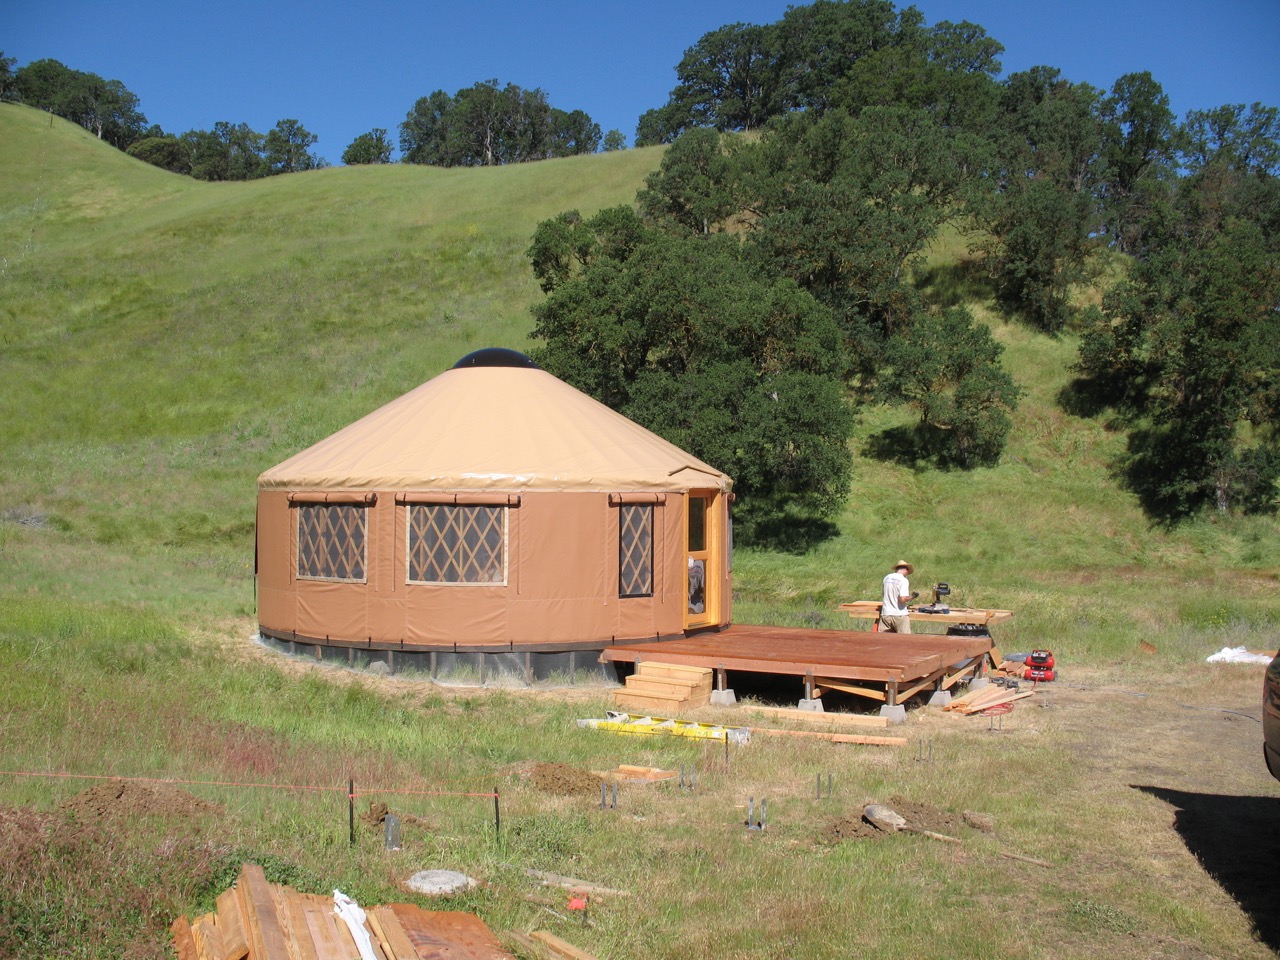 Yurt finished canvas, roof, and dome